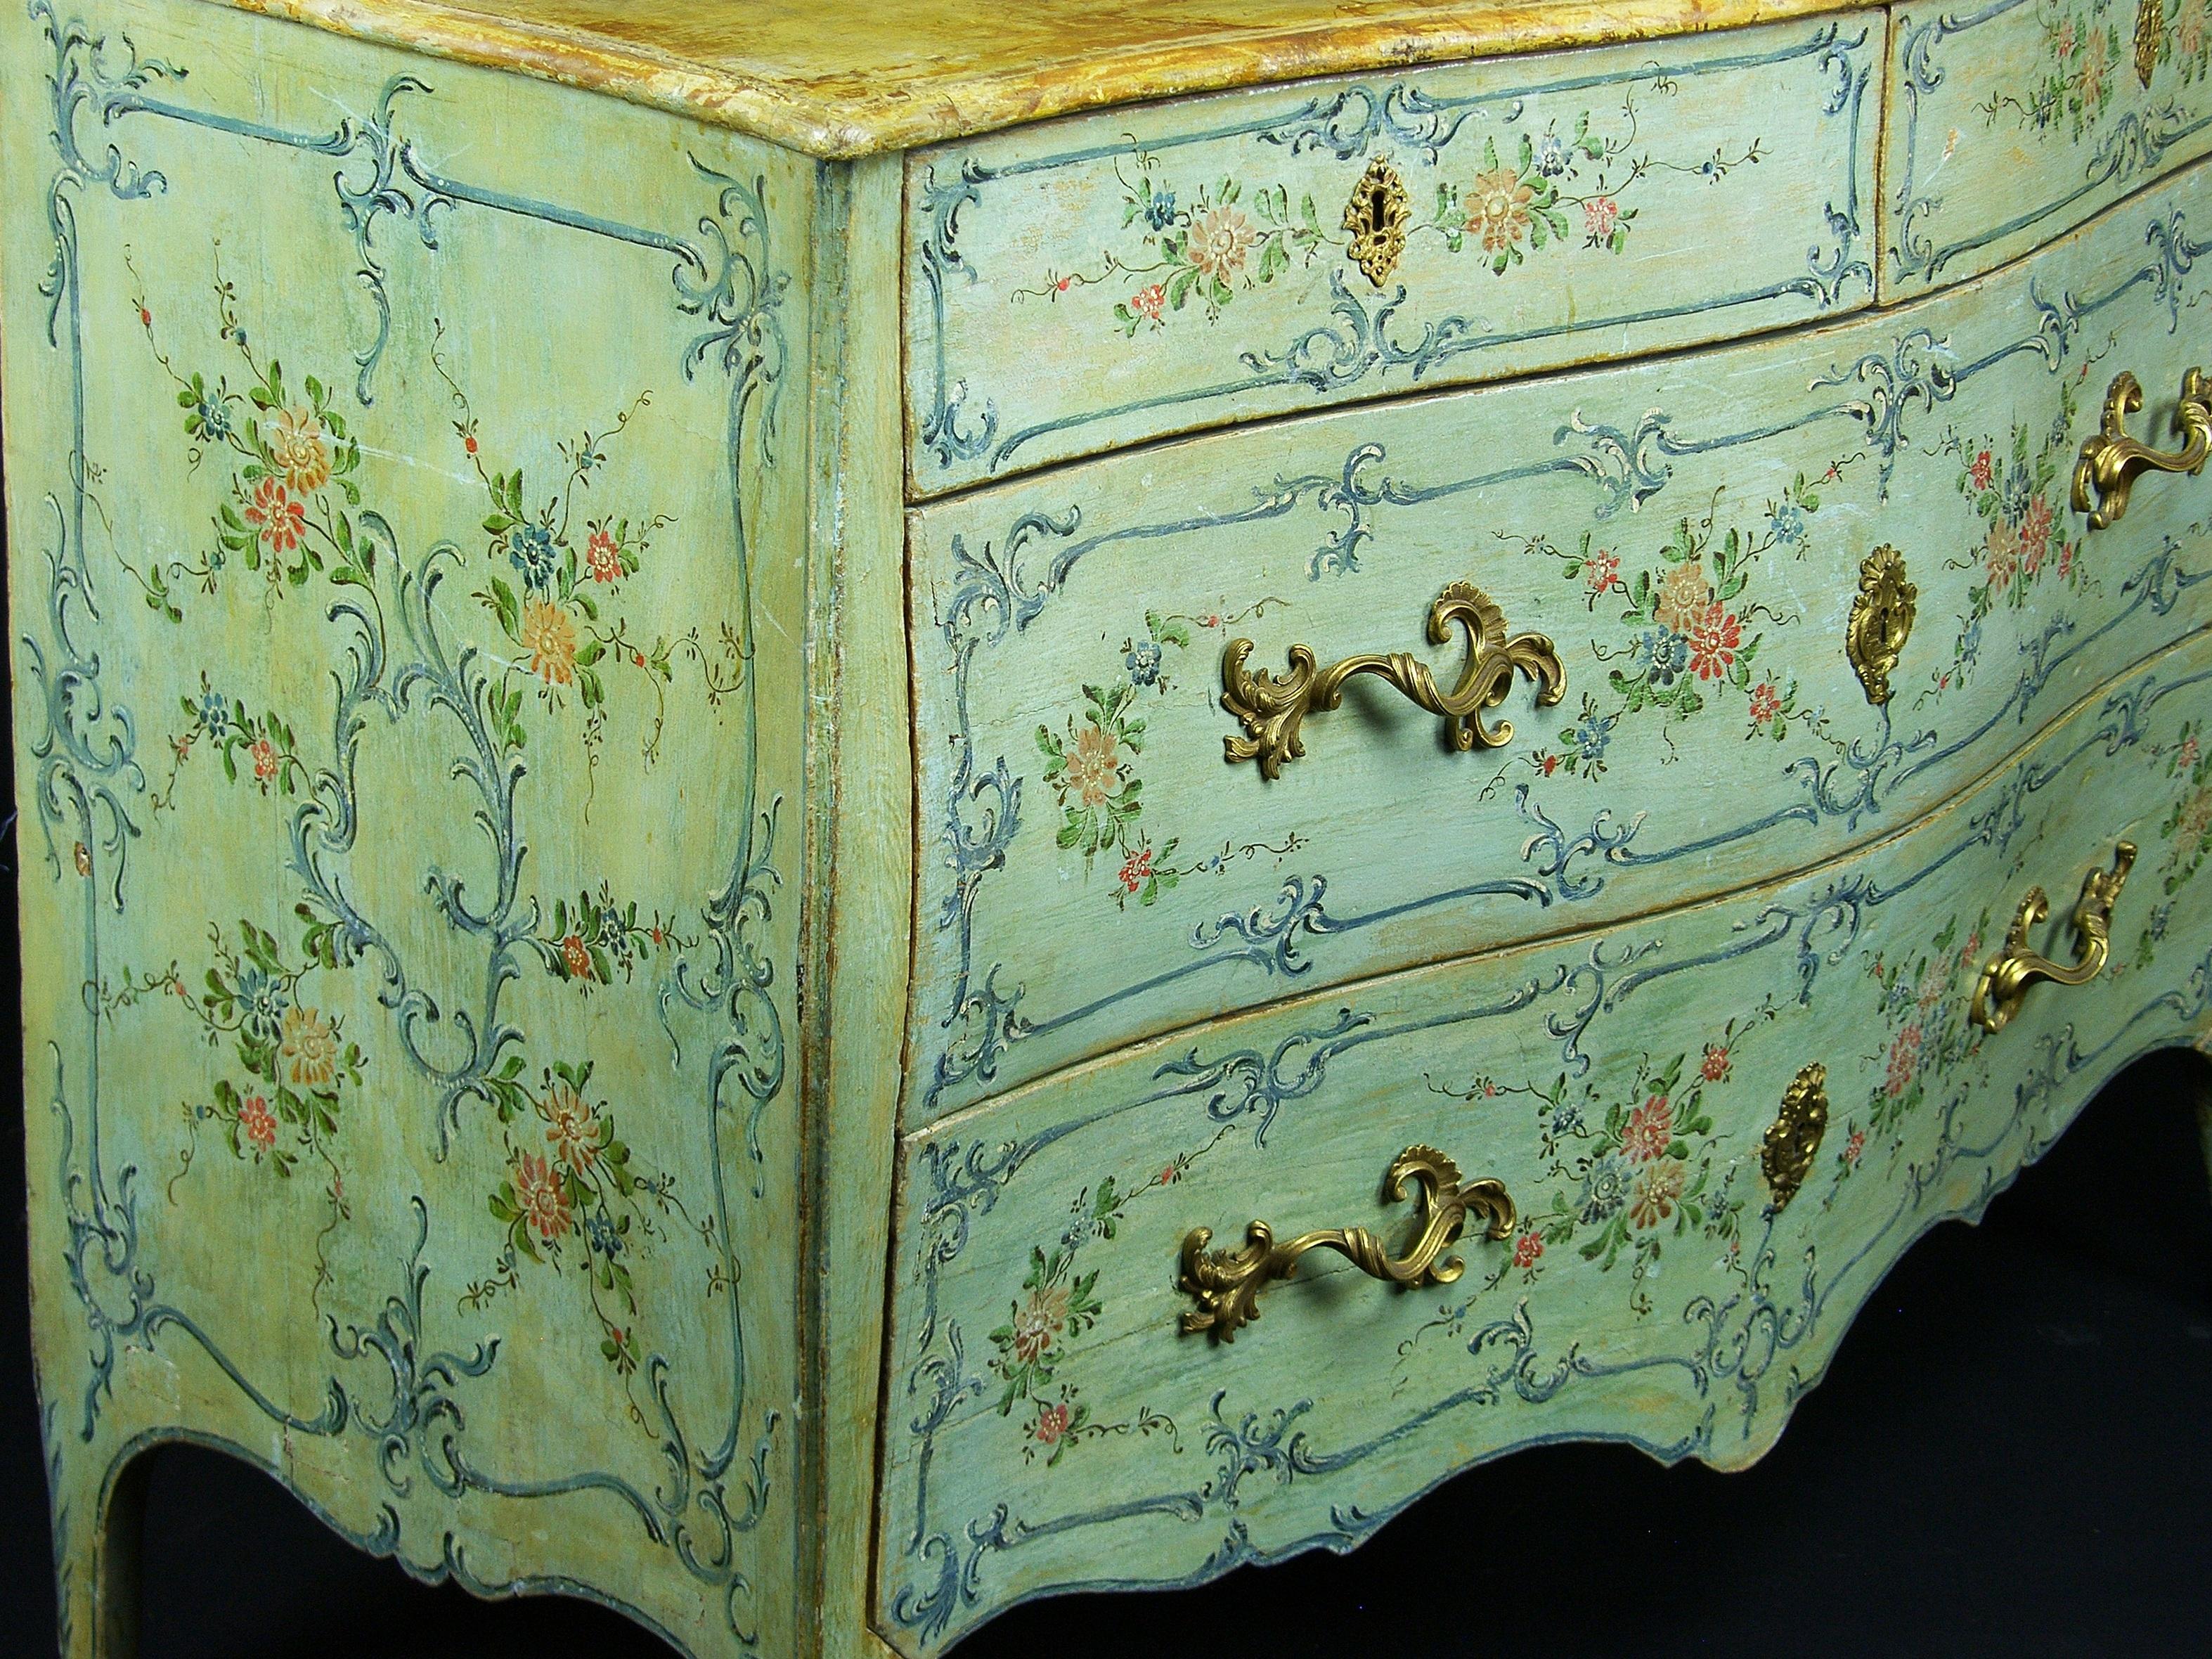 18th Century Italian Polychrome Lacquered Wooden Dresser with Floral Decorations 9